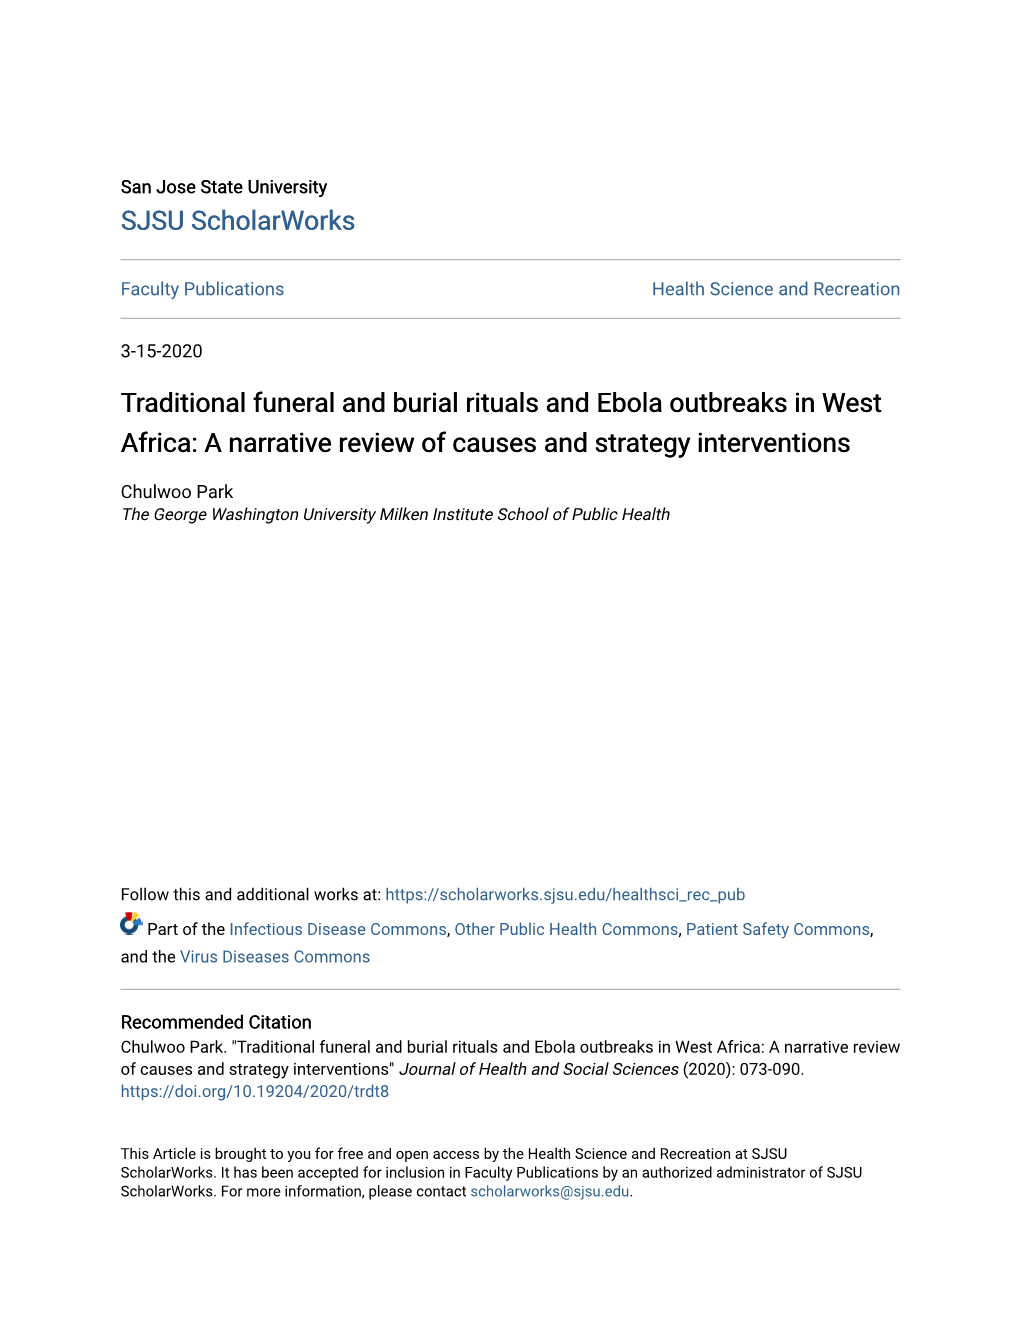 Traditional Funeral and Burial Rituals and Ebola Outbreaks in West Africa: a Narrative Review of Causes and Strategy Interventions